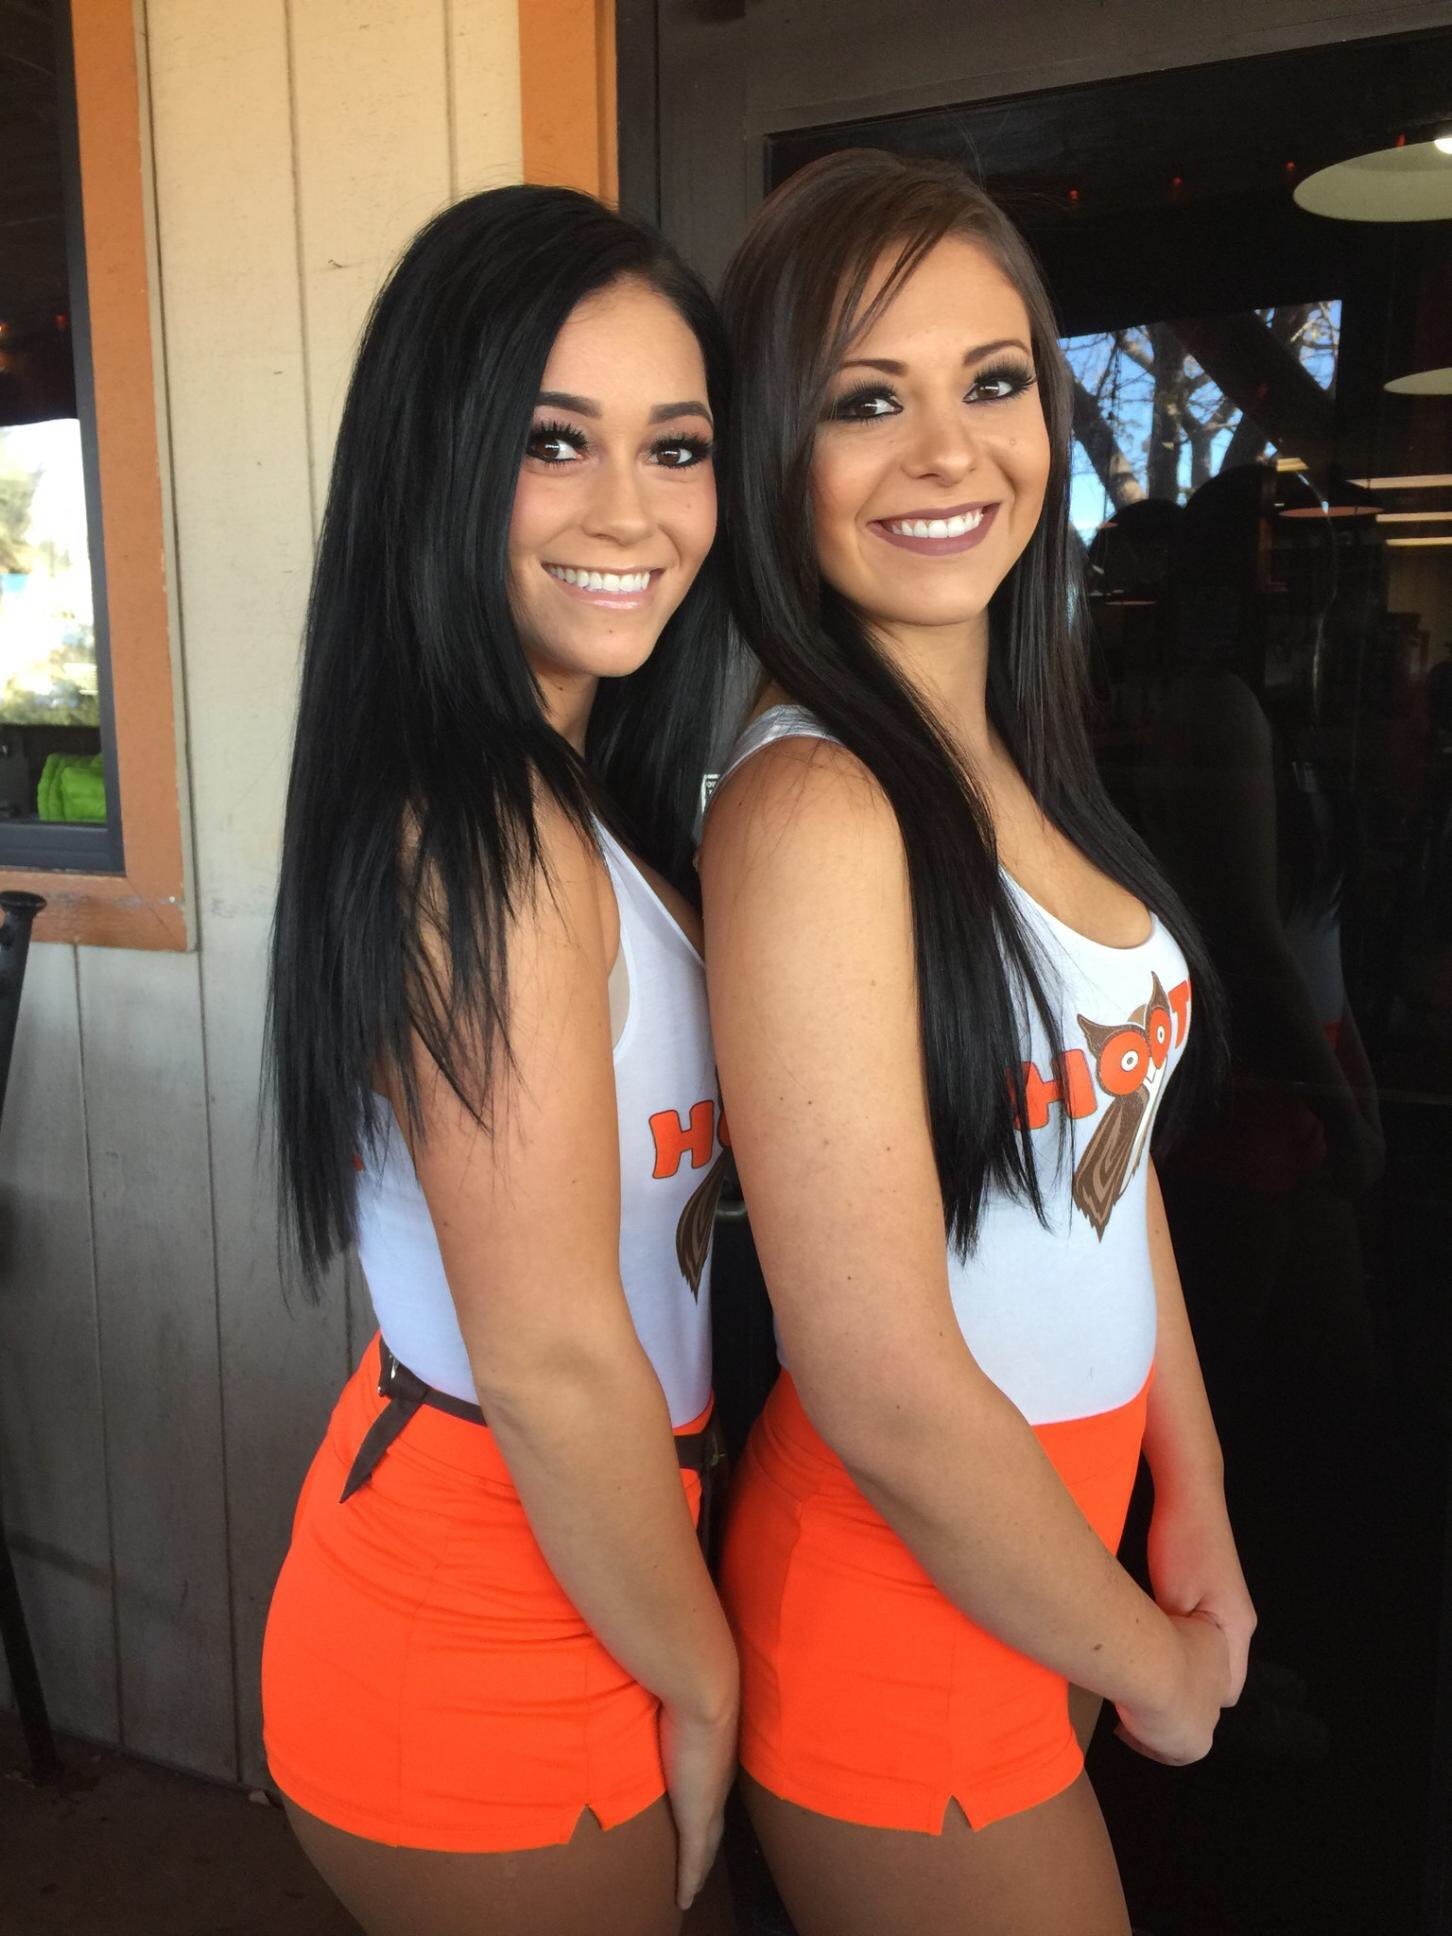 Hooters Colorado On Twitter Double Trouble For The Win Get To